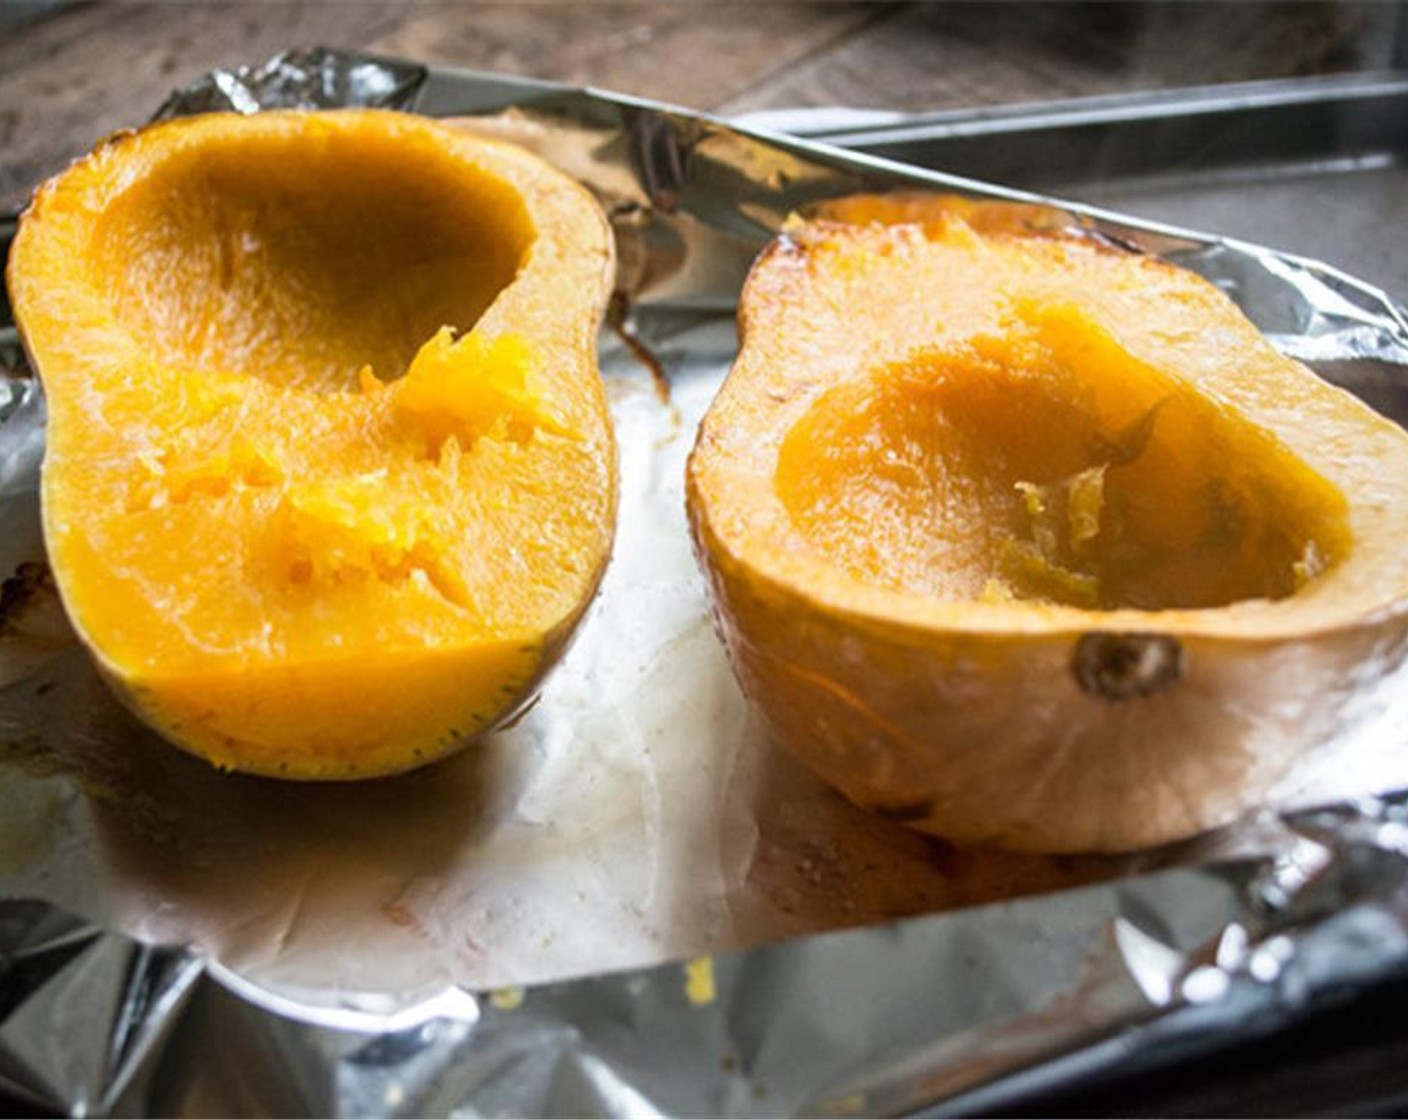 step 4 Once the squash has cooked, remove and allow to cool for 15 minutes or so. Remove the skin (should come off fairly easily now that it's cooked, if it doesn't, use a spoon to scrape our flesh) and measure out 2 cups cooked and mashed squash.